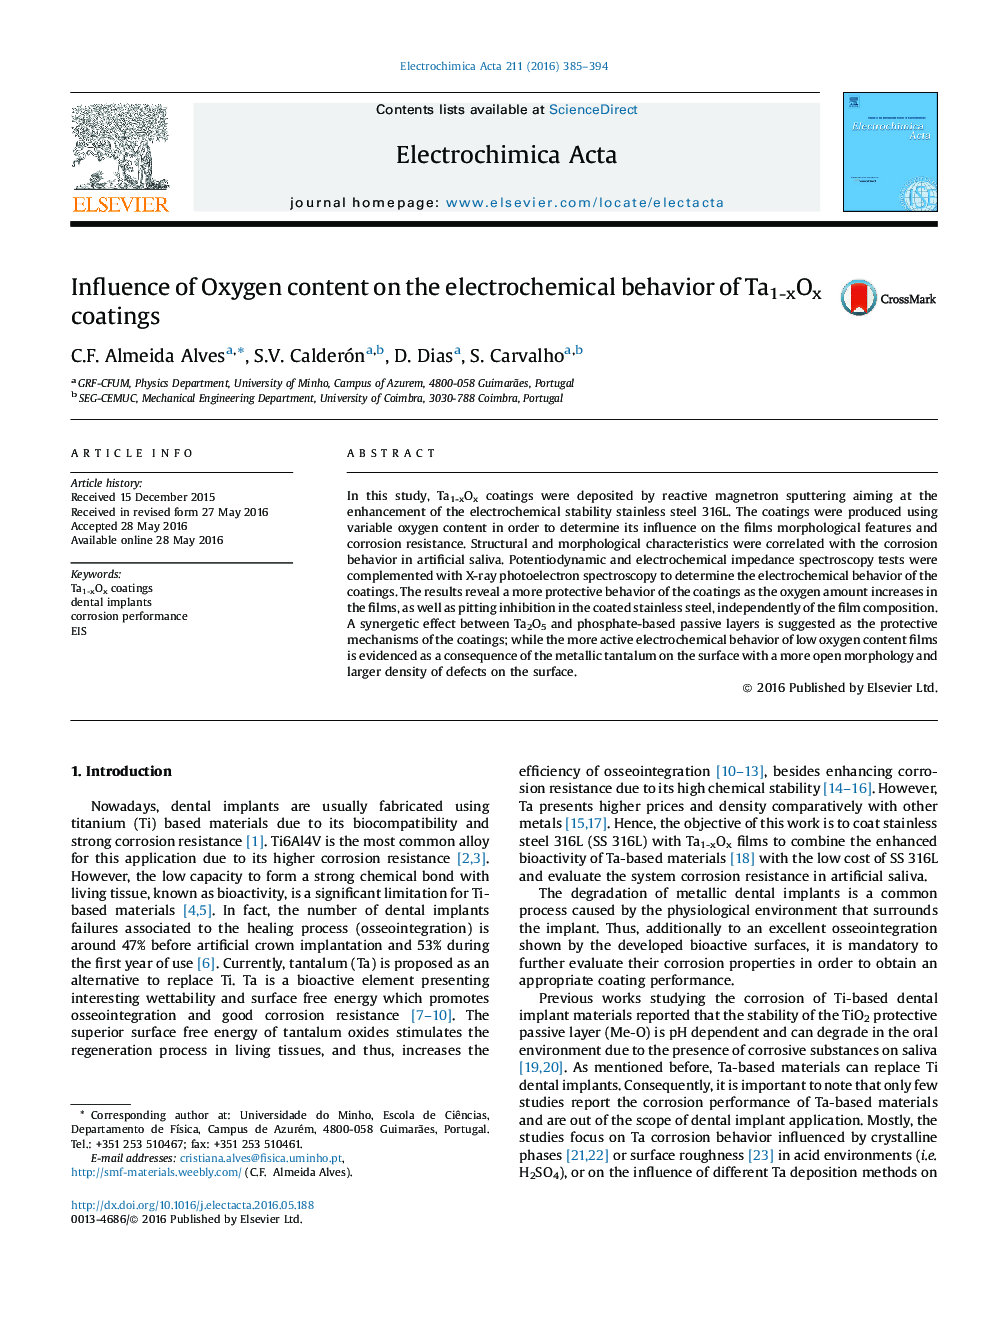 Influence of Oxygen content on the electrochemical behavior of Ta1-xOx coatings